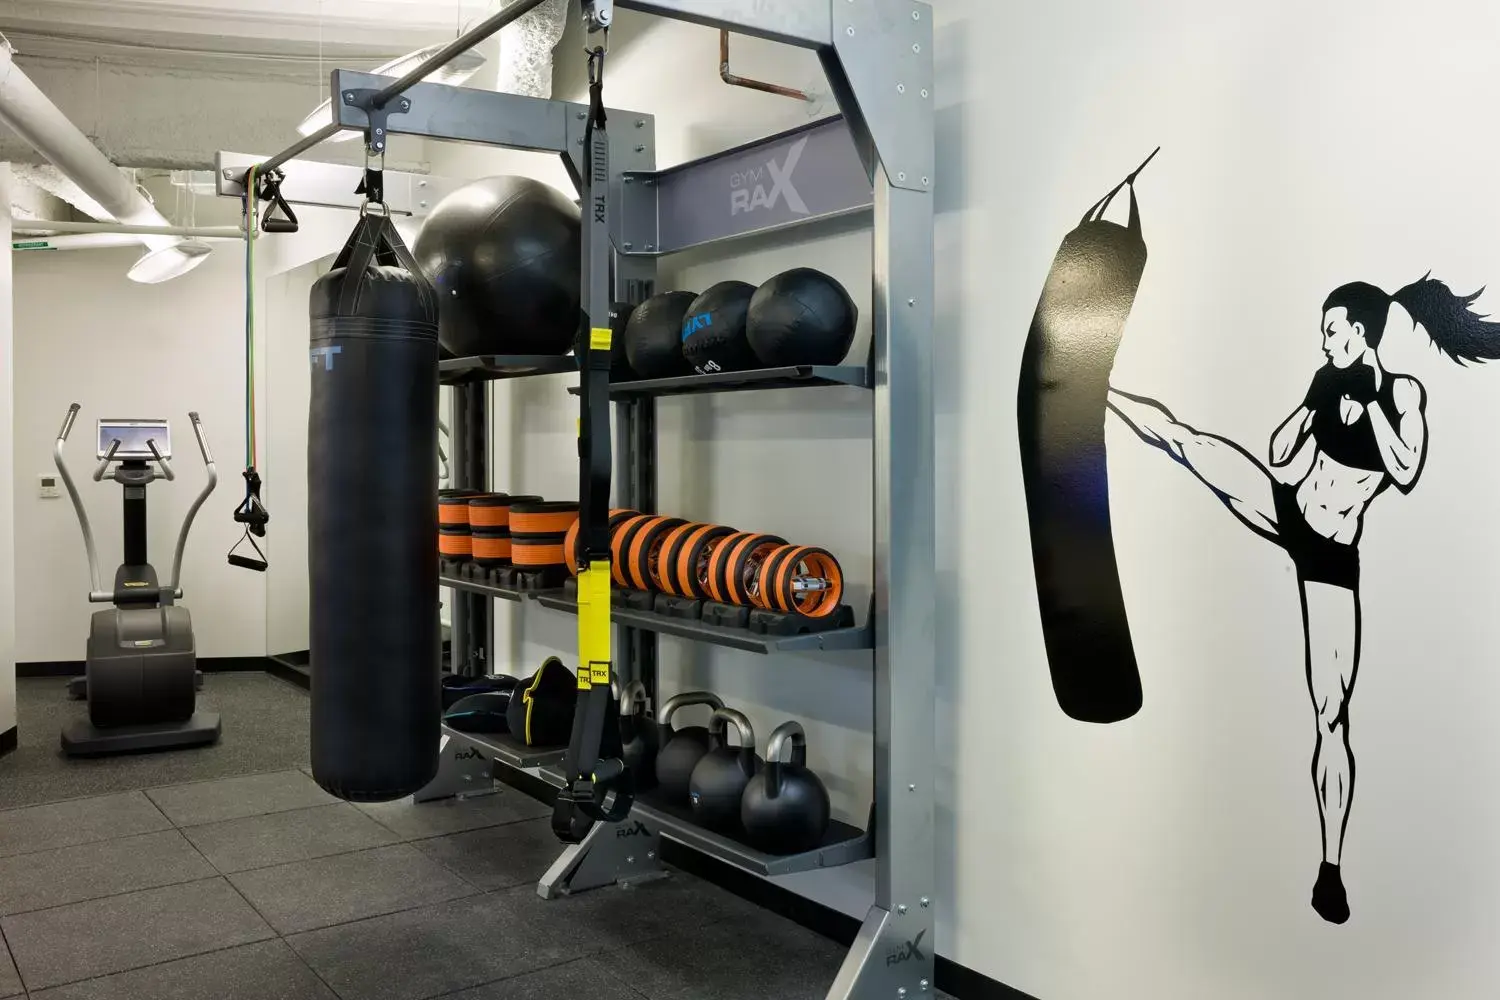 Fitness centre/facilities, Fitness Center/Facilities in Placemakr Dupont Circle